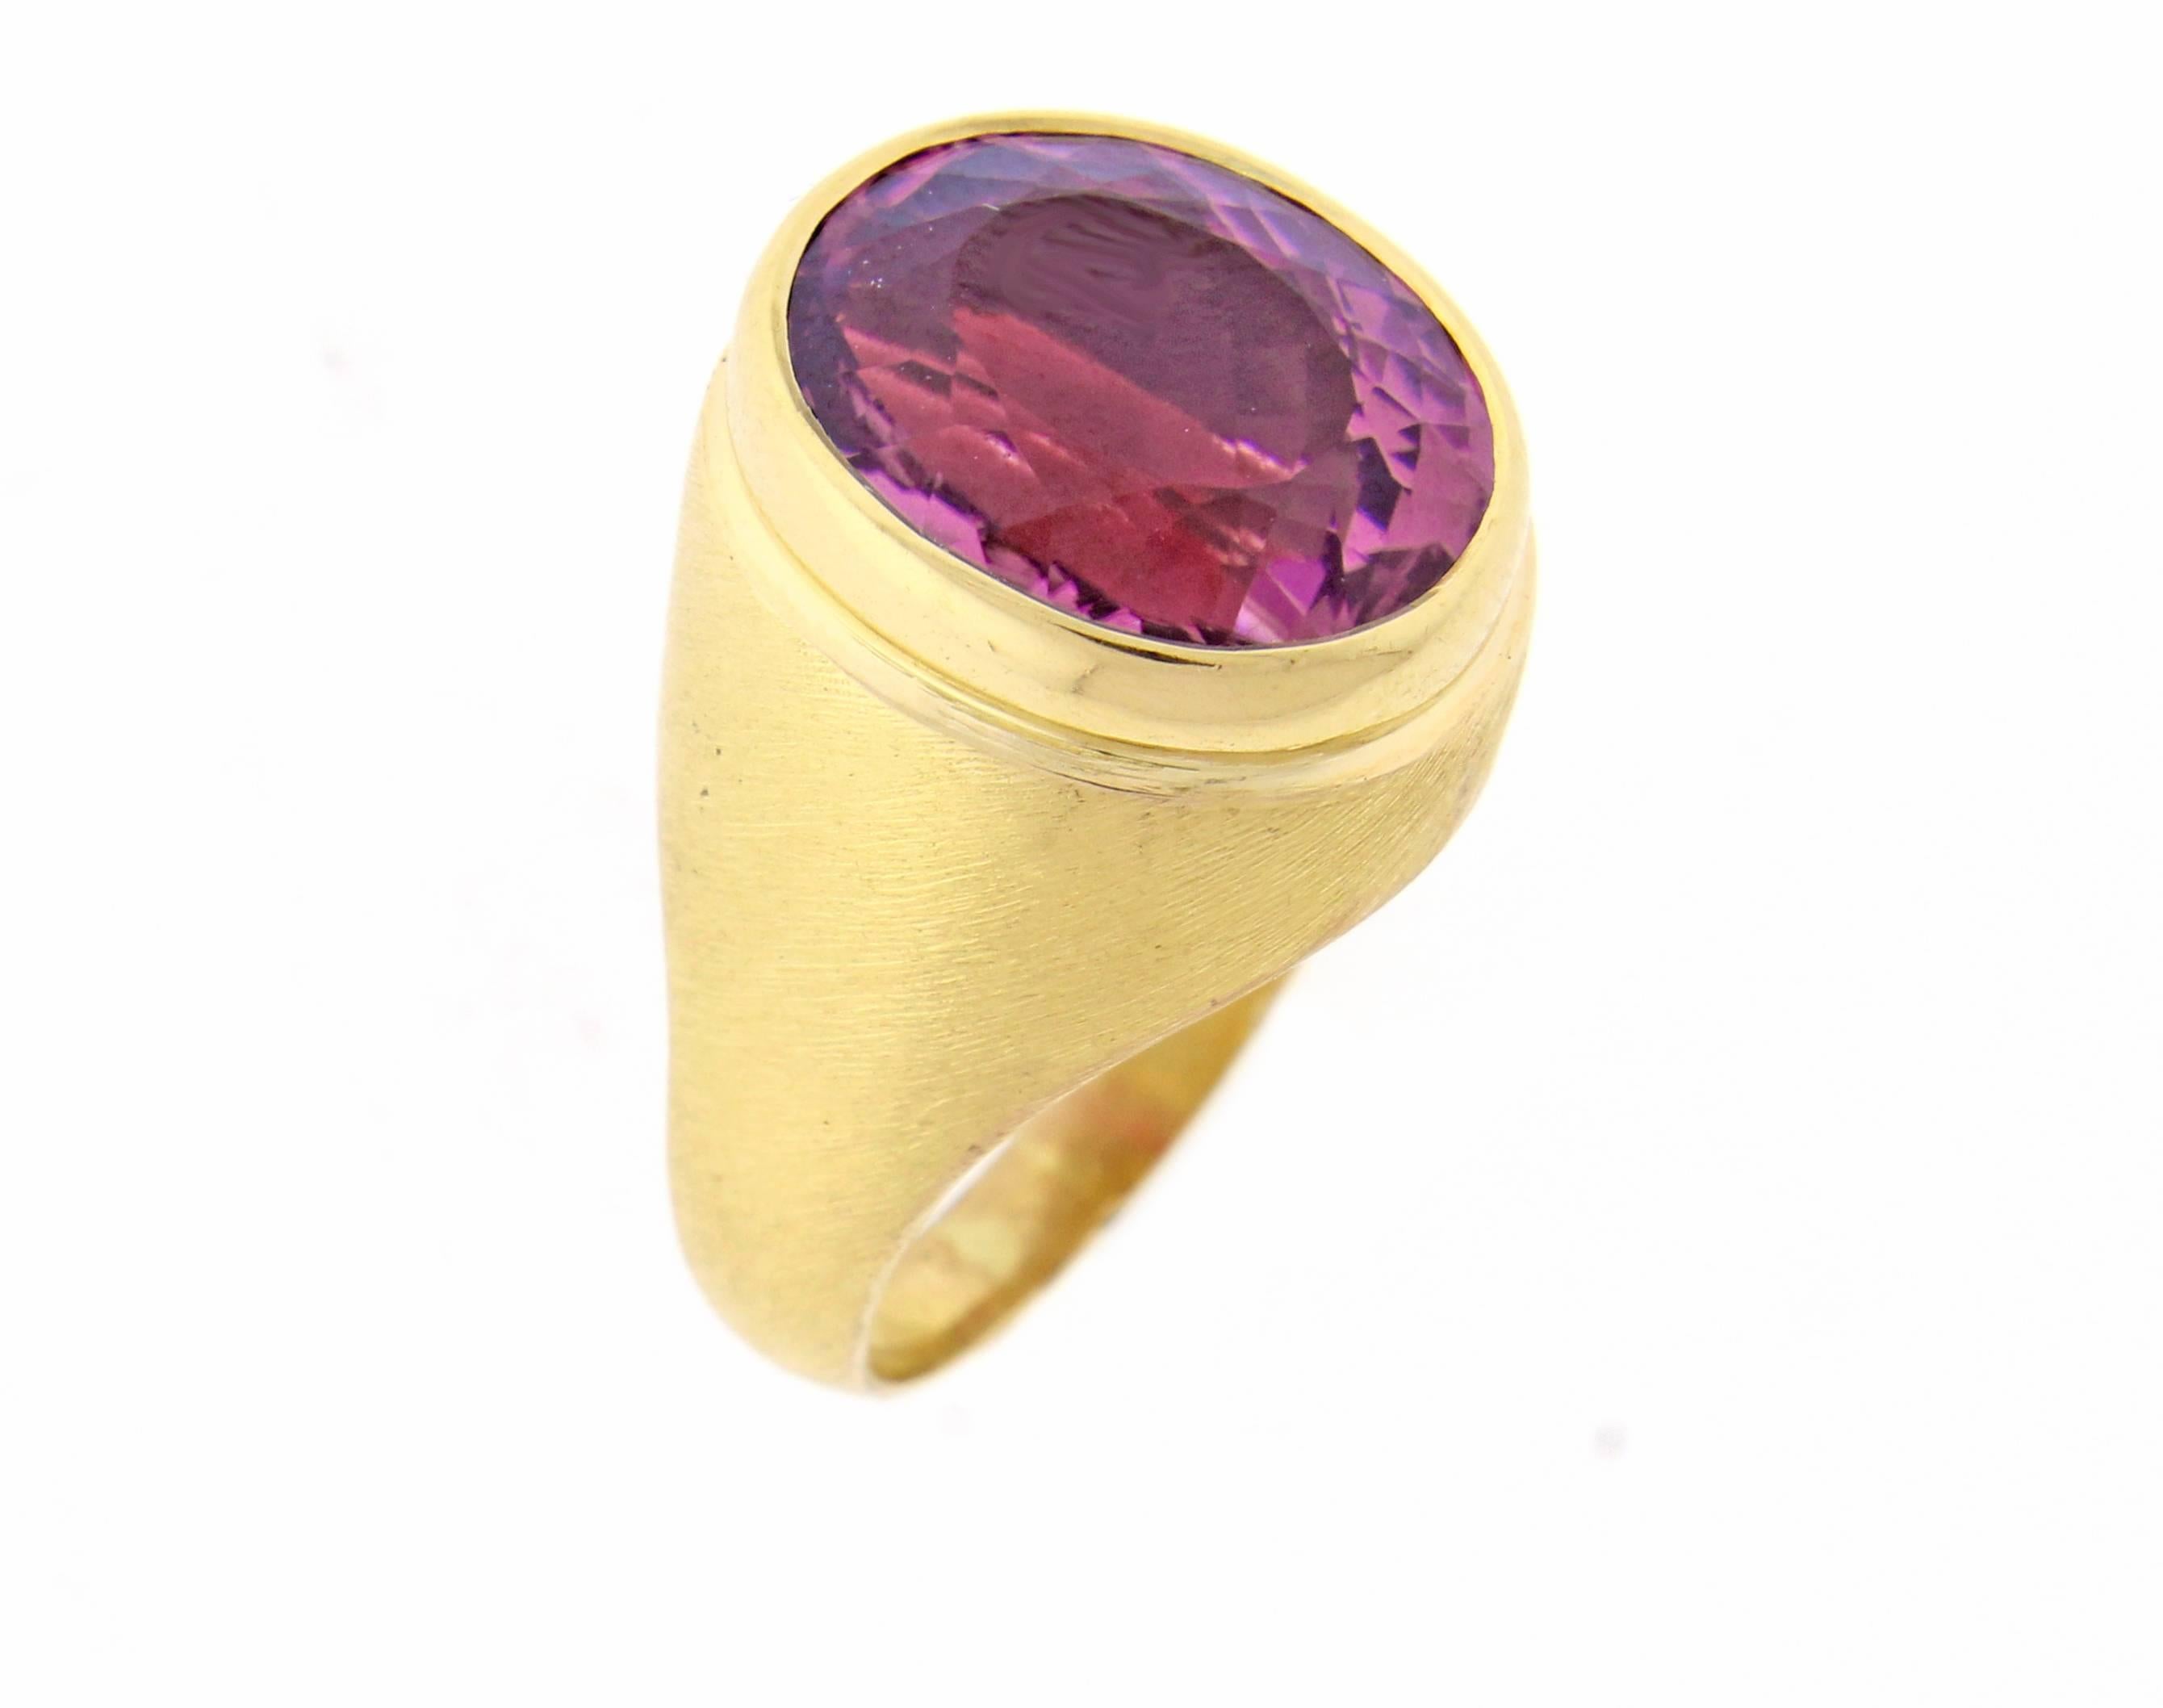 Brushed 18 karat gold pink tourmaline by by world renowned Brazilian jeweler Haroldo Burle Marx. The oval raspberry pink Tourmaline measures  14.5*12.5mm  weighing  21 carats.  Size 7.5 adjustable
